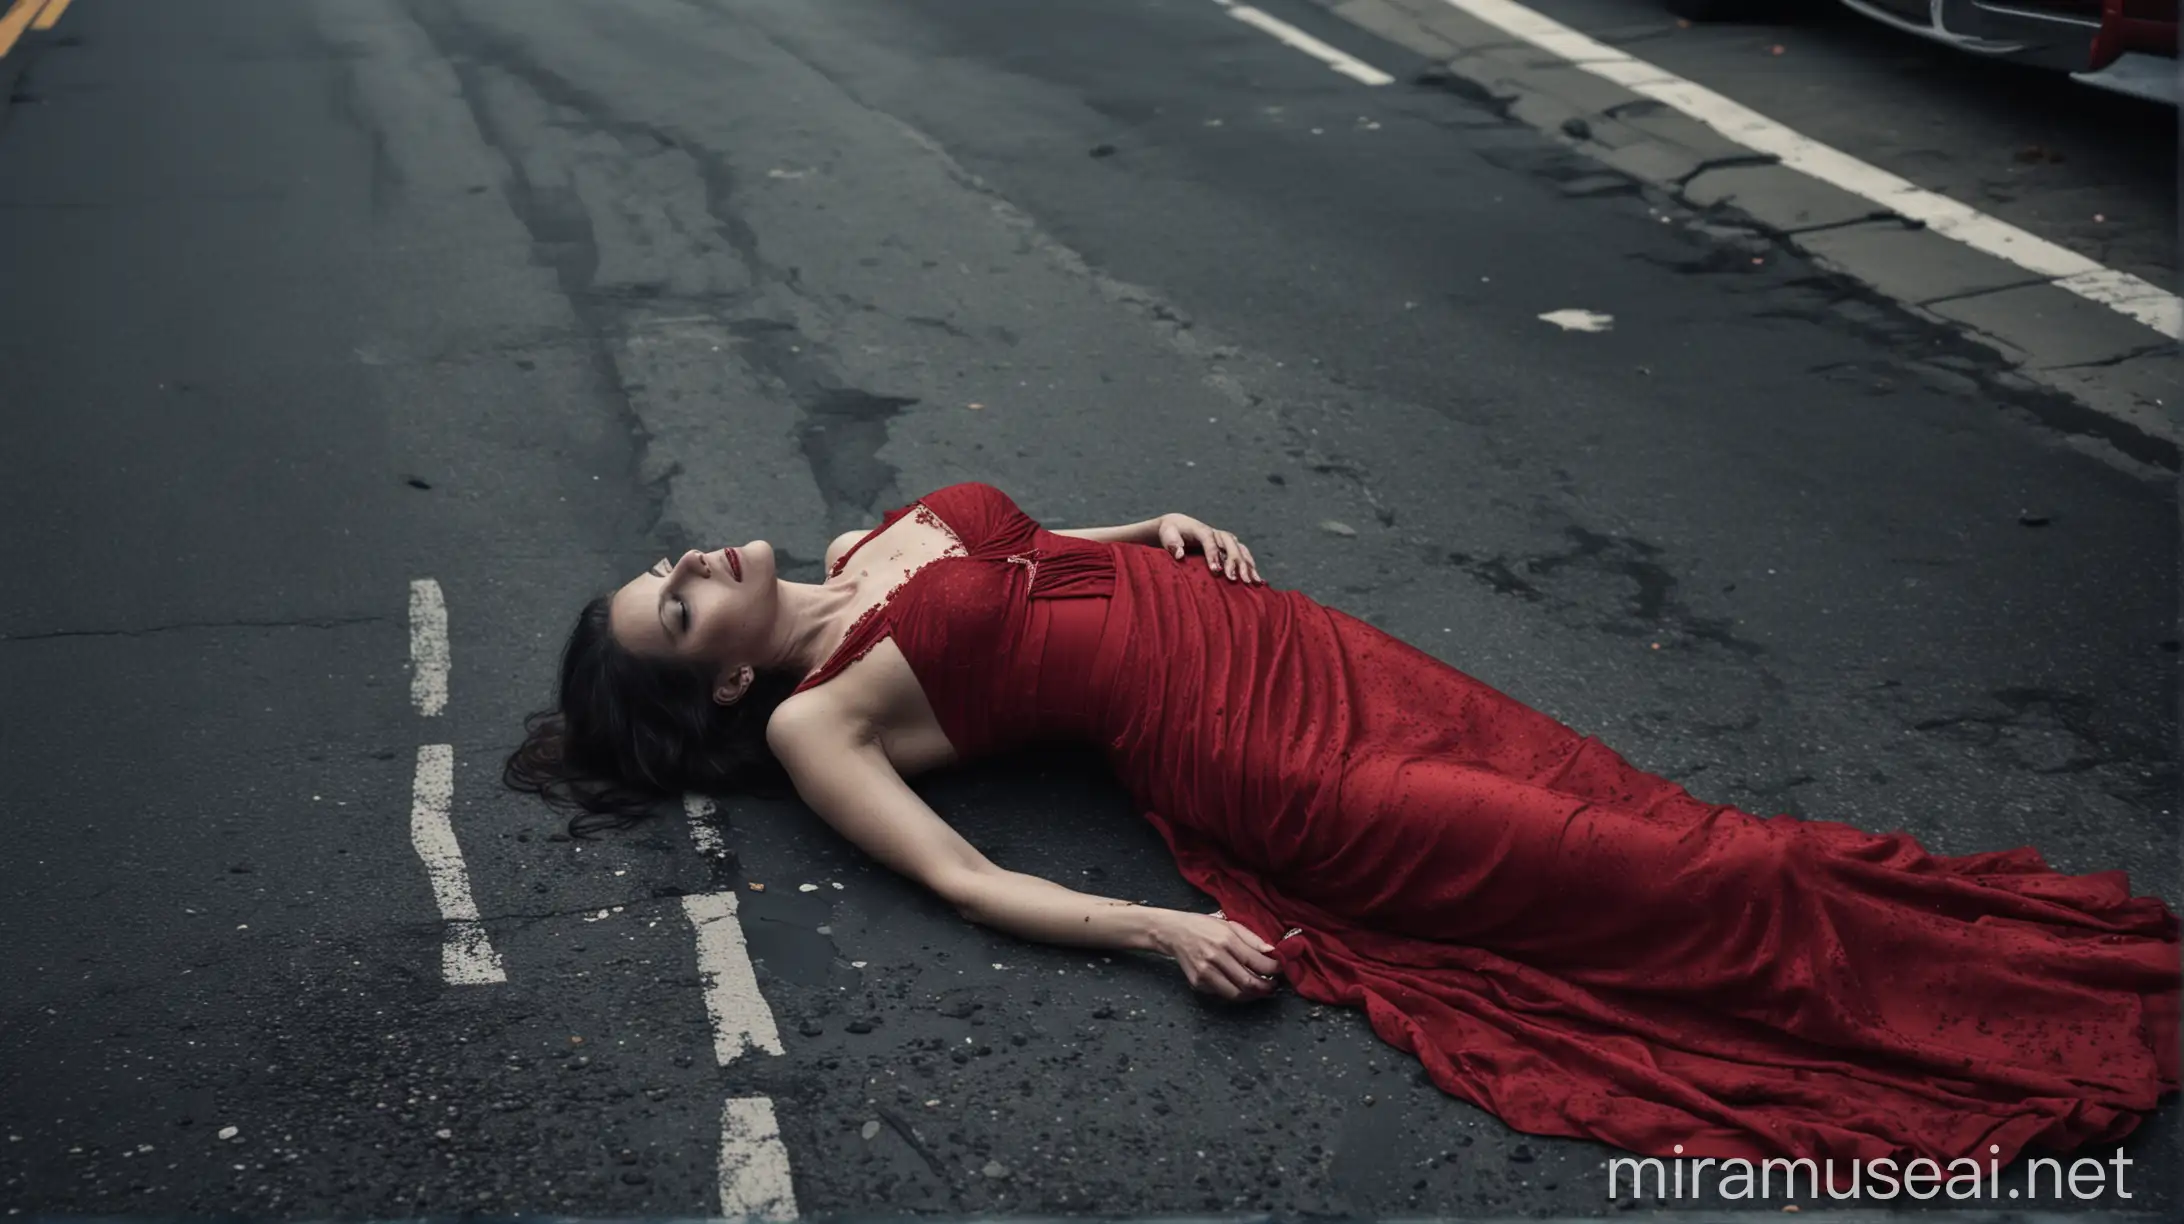 Eerie Scene Abandoned Woman in Red Dress on New York Streets